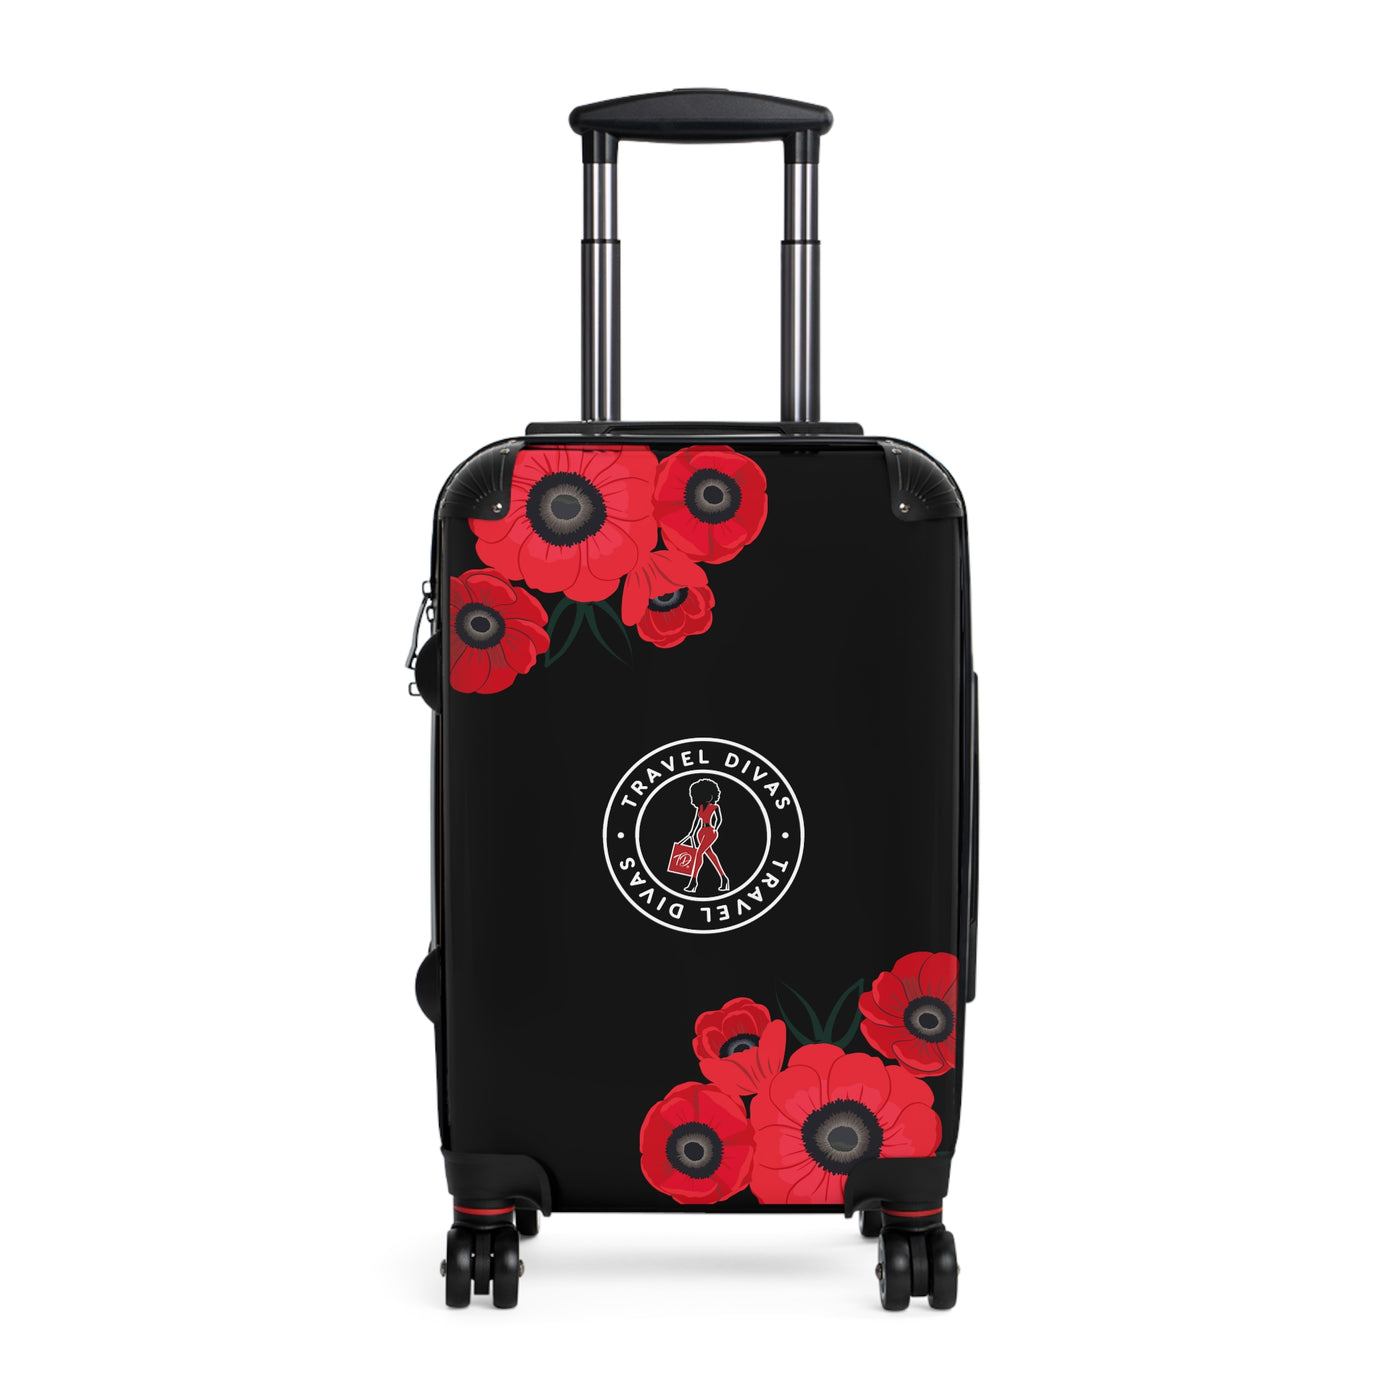 Tulip Carry-on Luggage